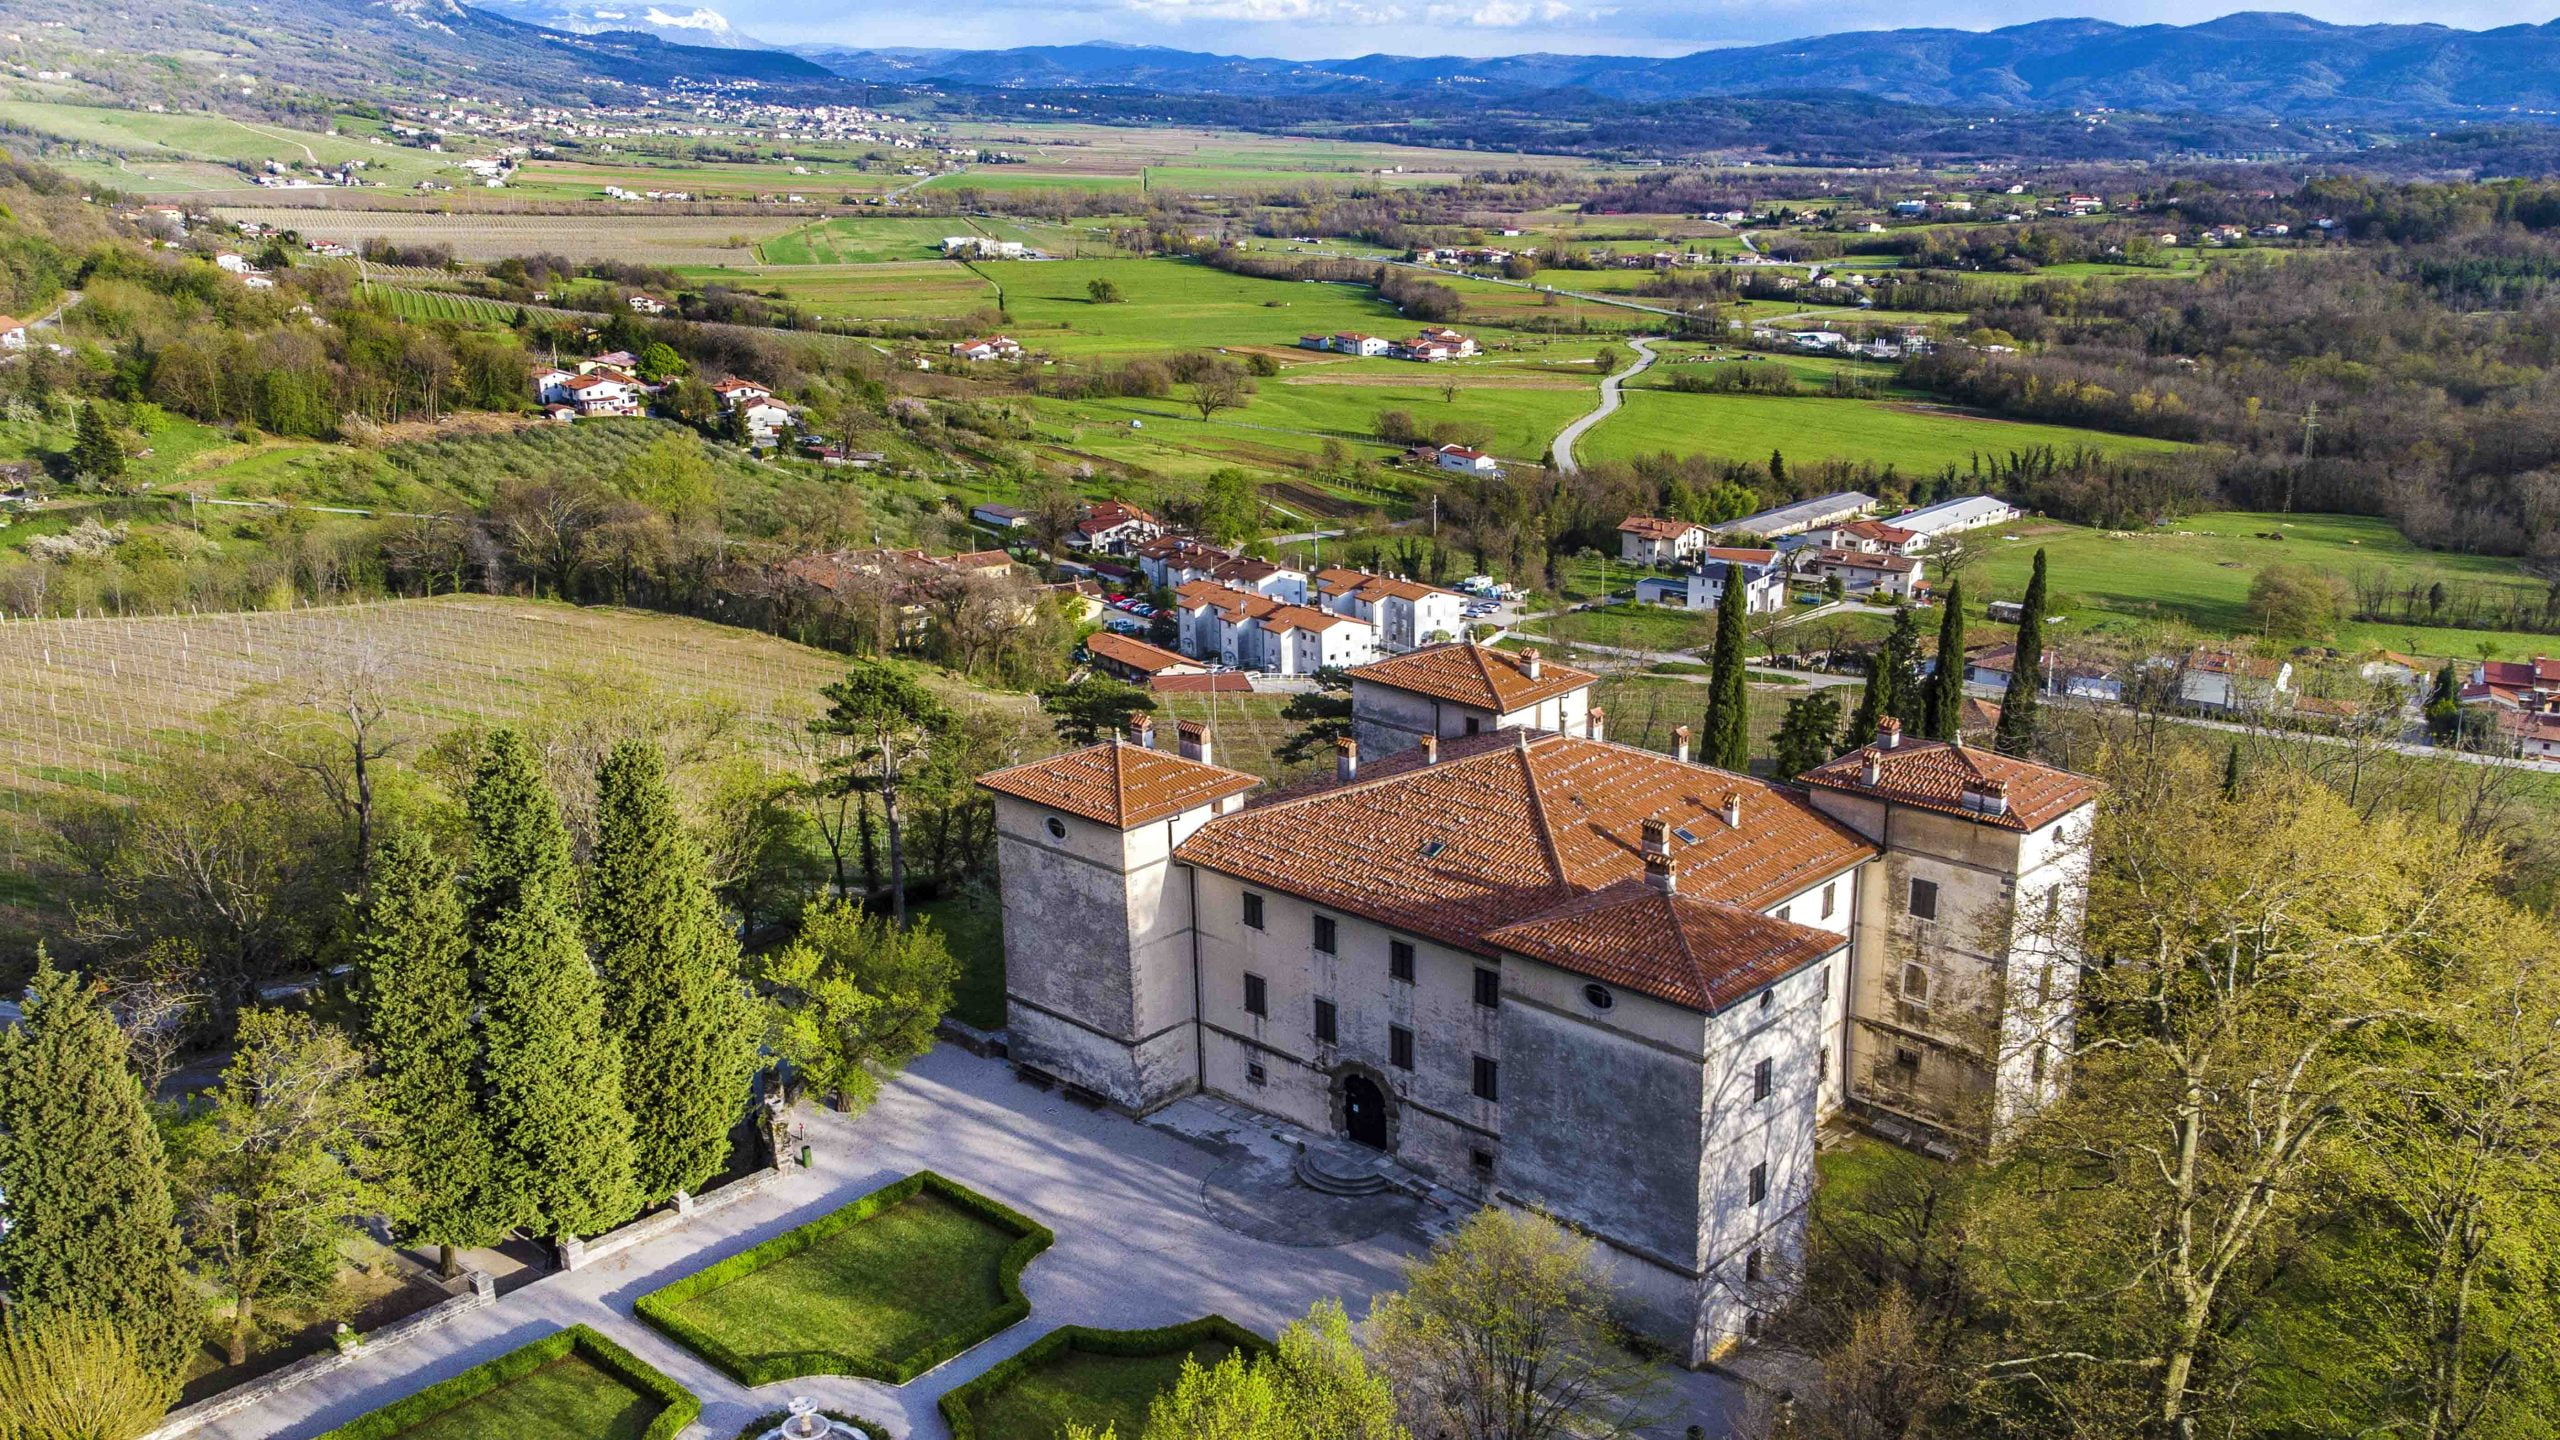 Kromberk Castle, Vipava Valley is popular on cycling routes in Slovenia